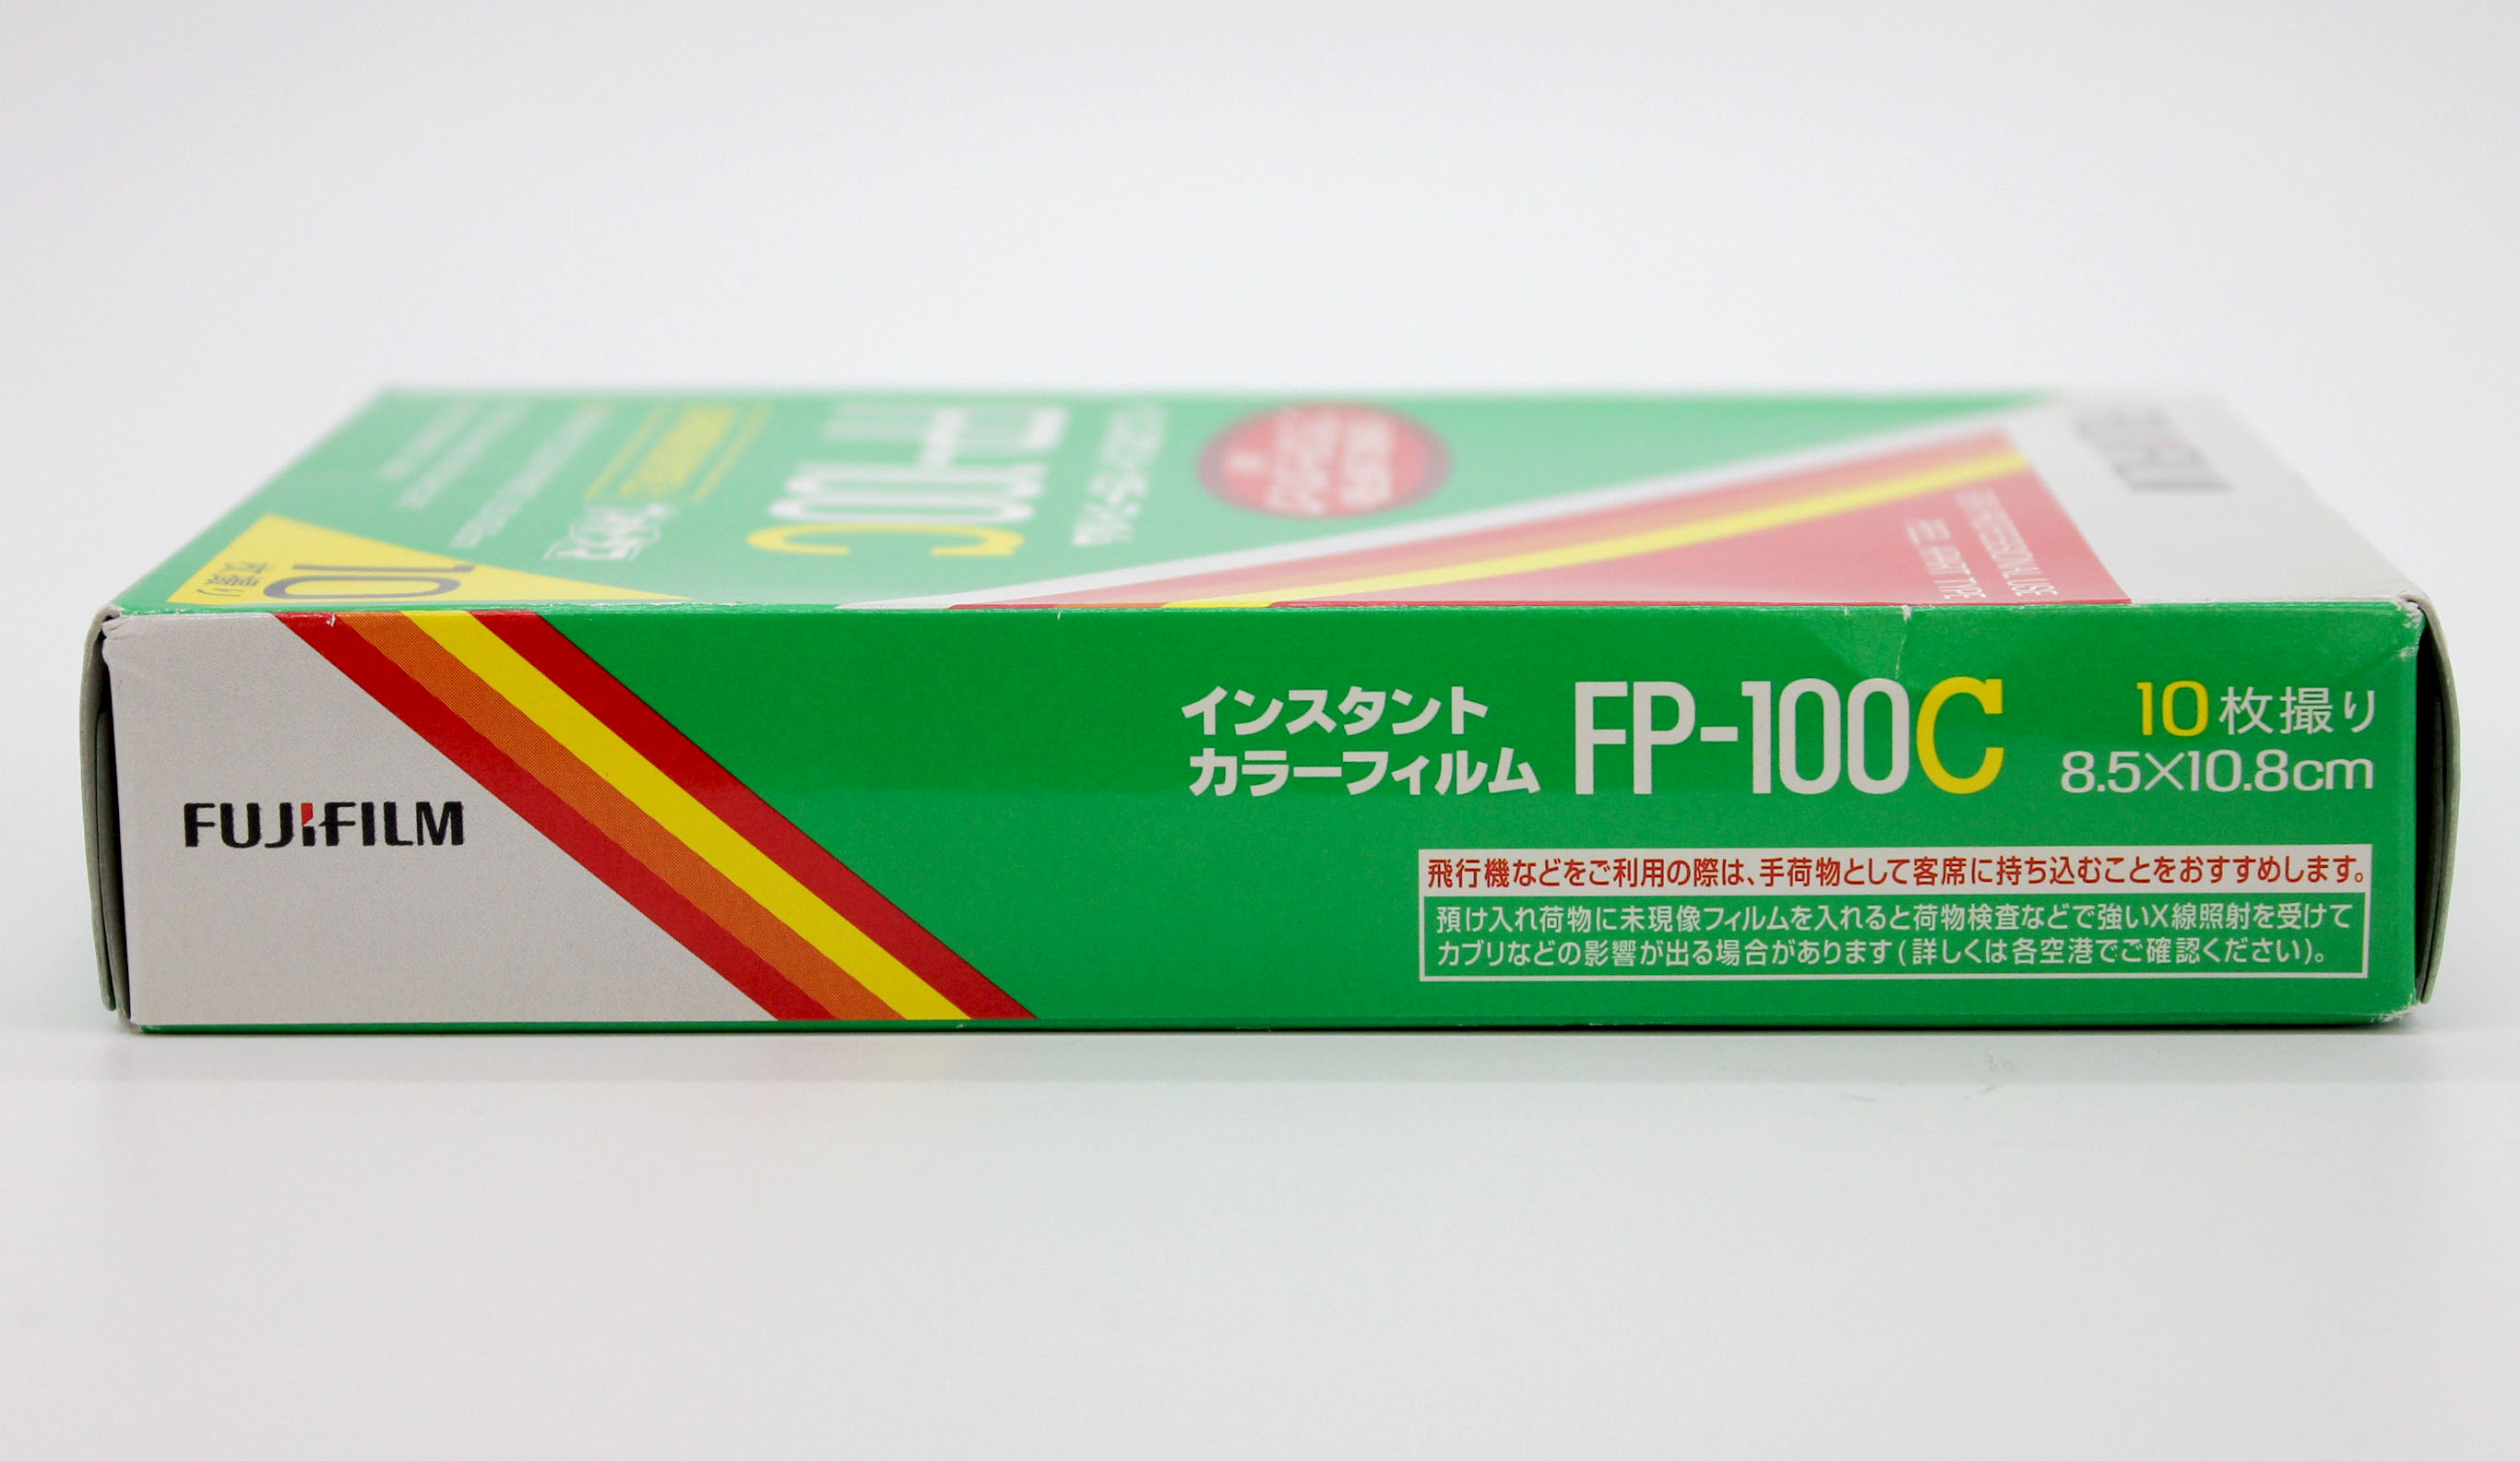  Fujifilm FP-100C Professional Instant Color Film Expired 11/2017 from Japan Photo 6